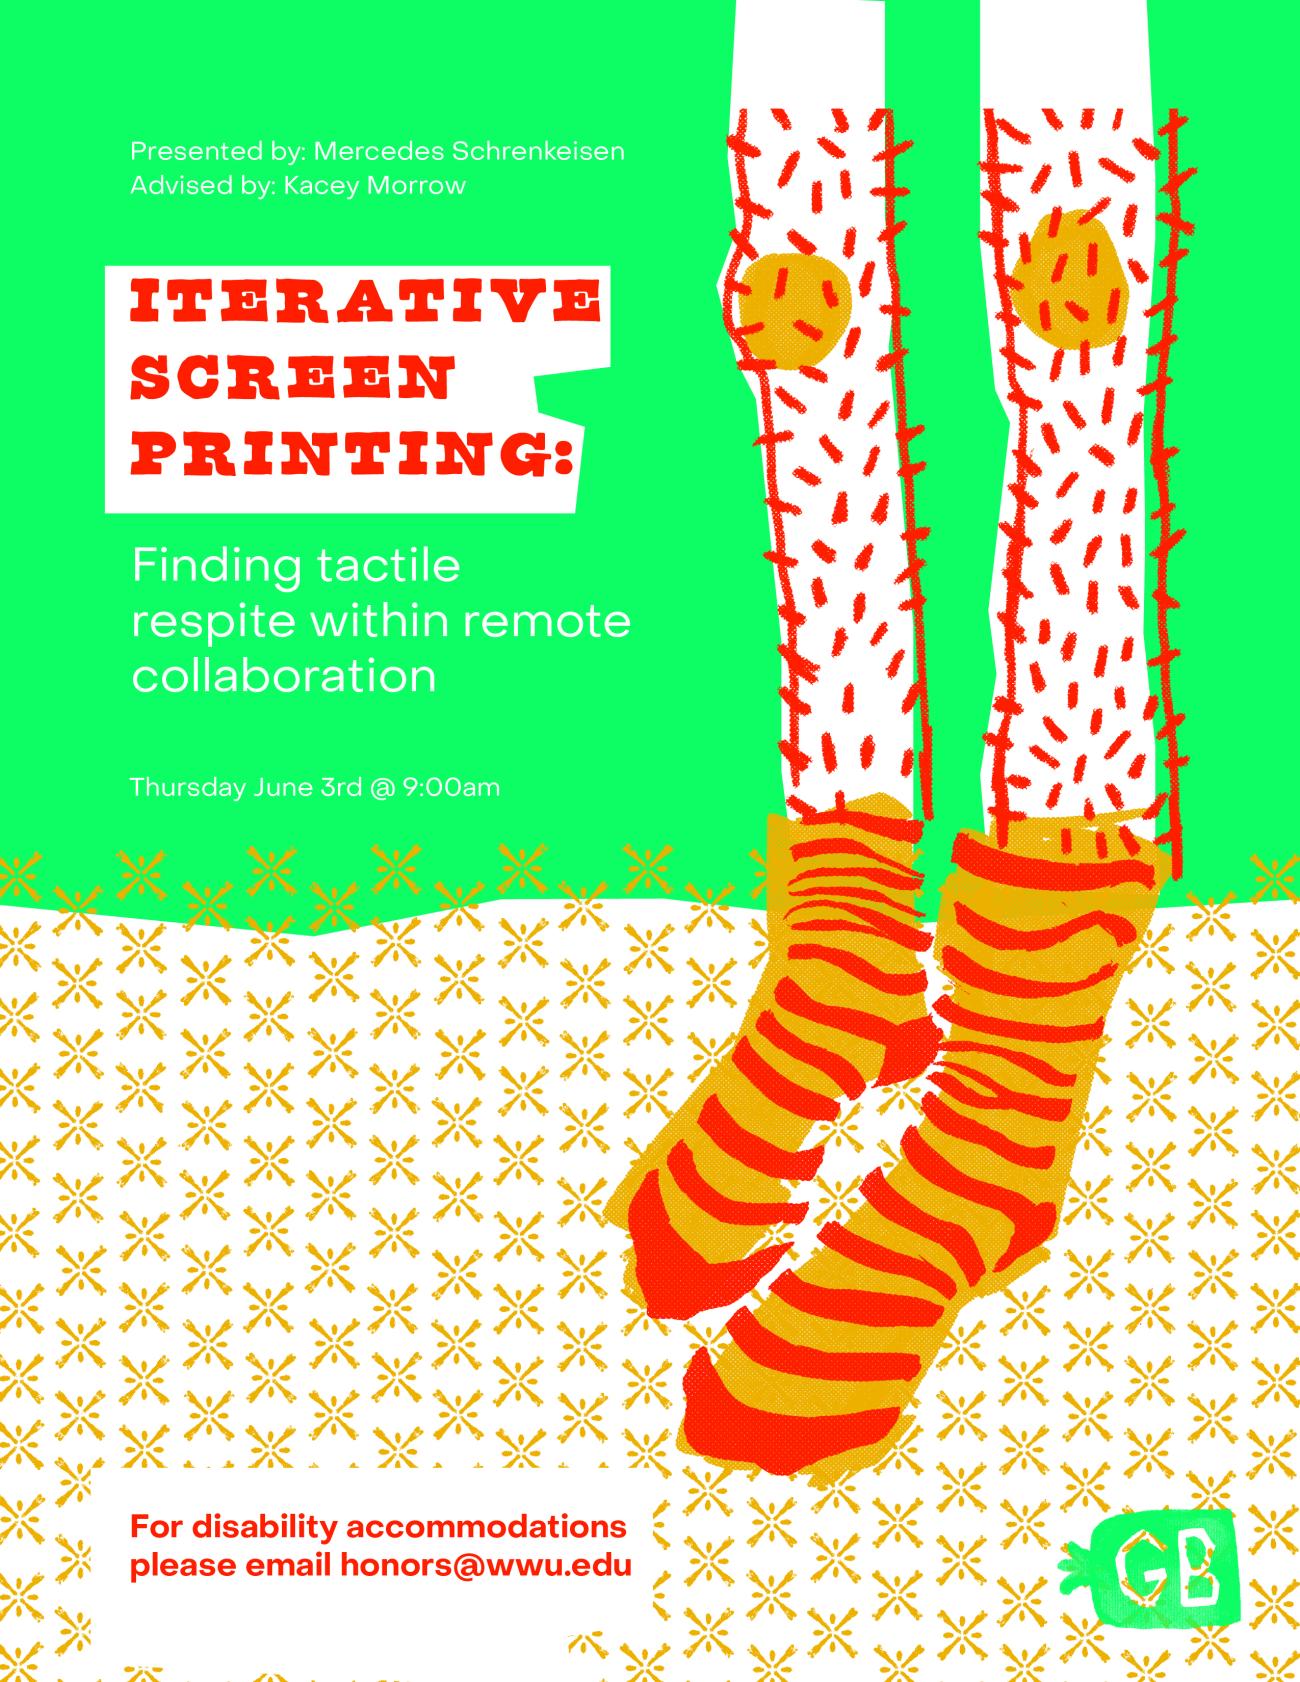 Teal background containing a screen-printed illustration of two hairy legs ending in a pair of red and yellow striped socks. Text reads “Iterative Screen Printing: Finding Tactile Respite Within Remote Collaboration. Presented by Mercedes Schrenkeisen, Advised by Kacey Morrow. Thursday June 3rd at 9:00am. For disability accommodations please email honors@wwu.edu”. 